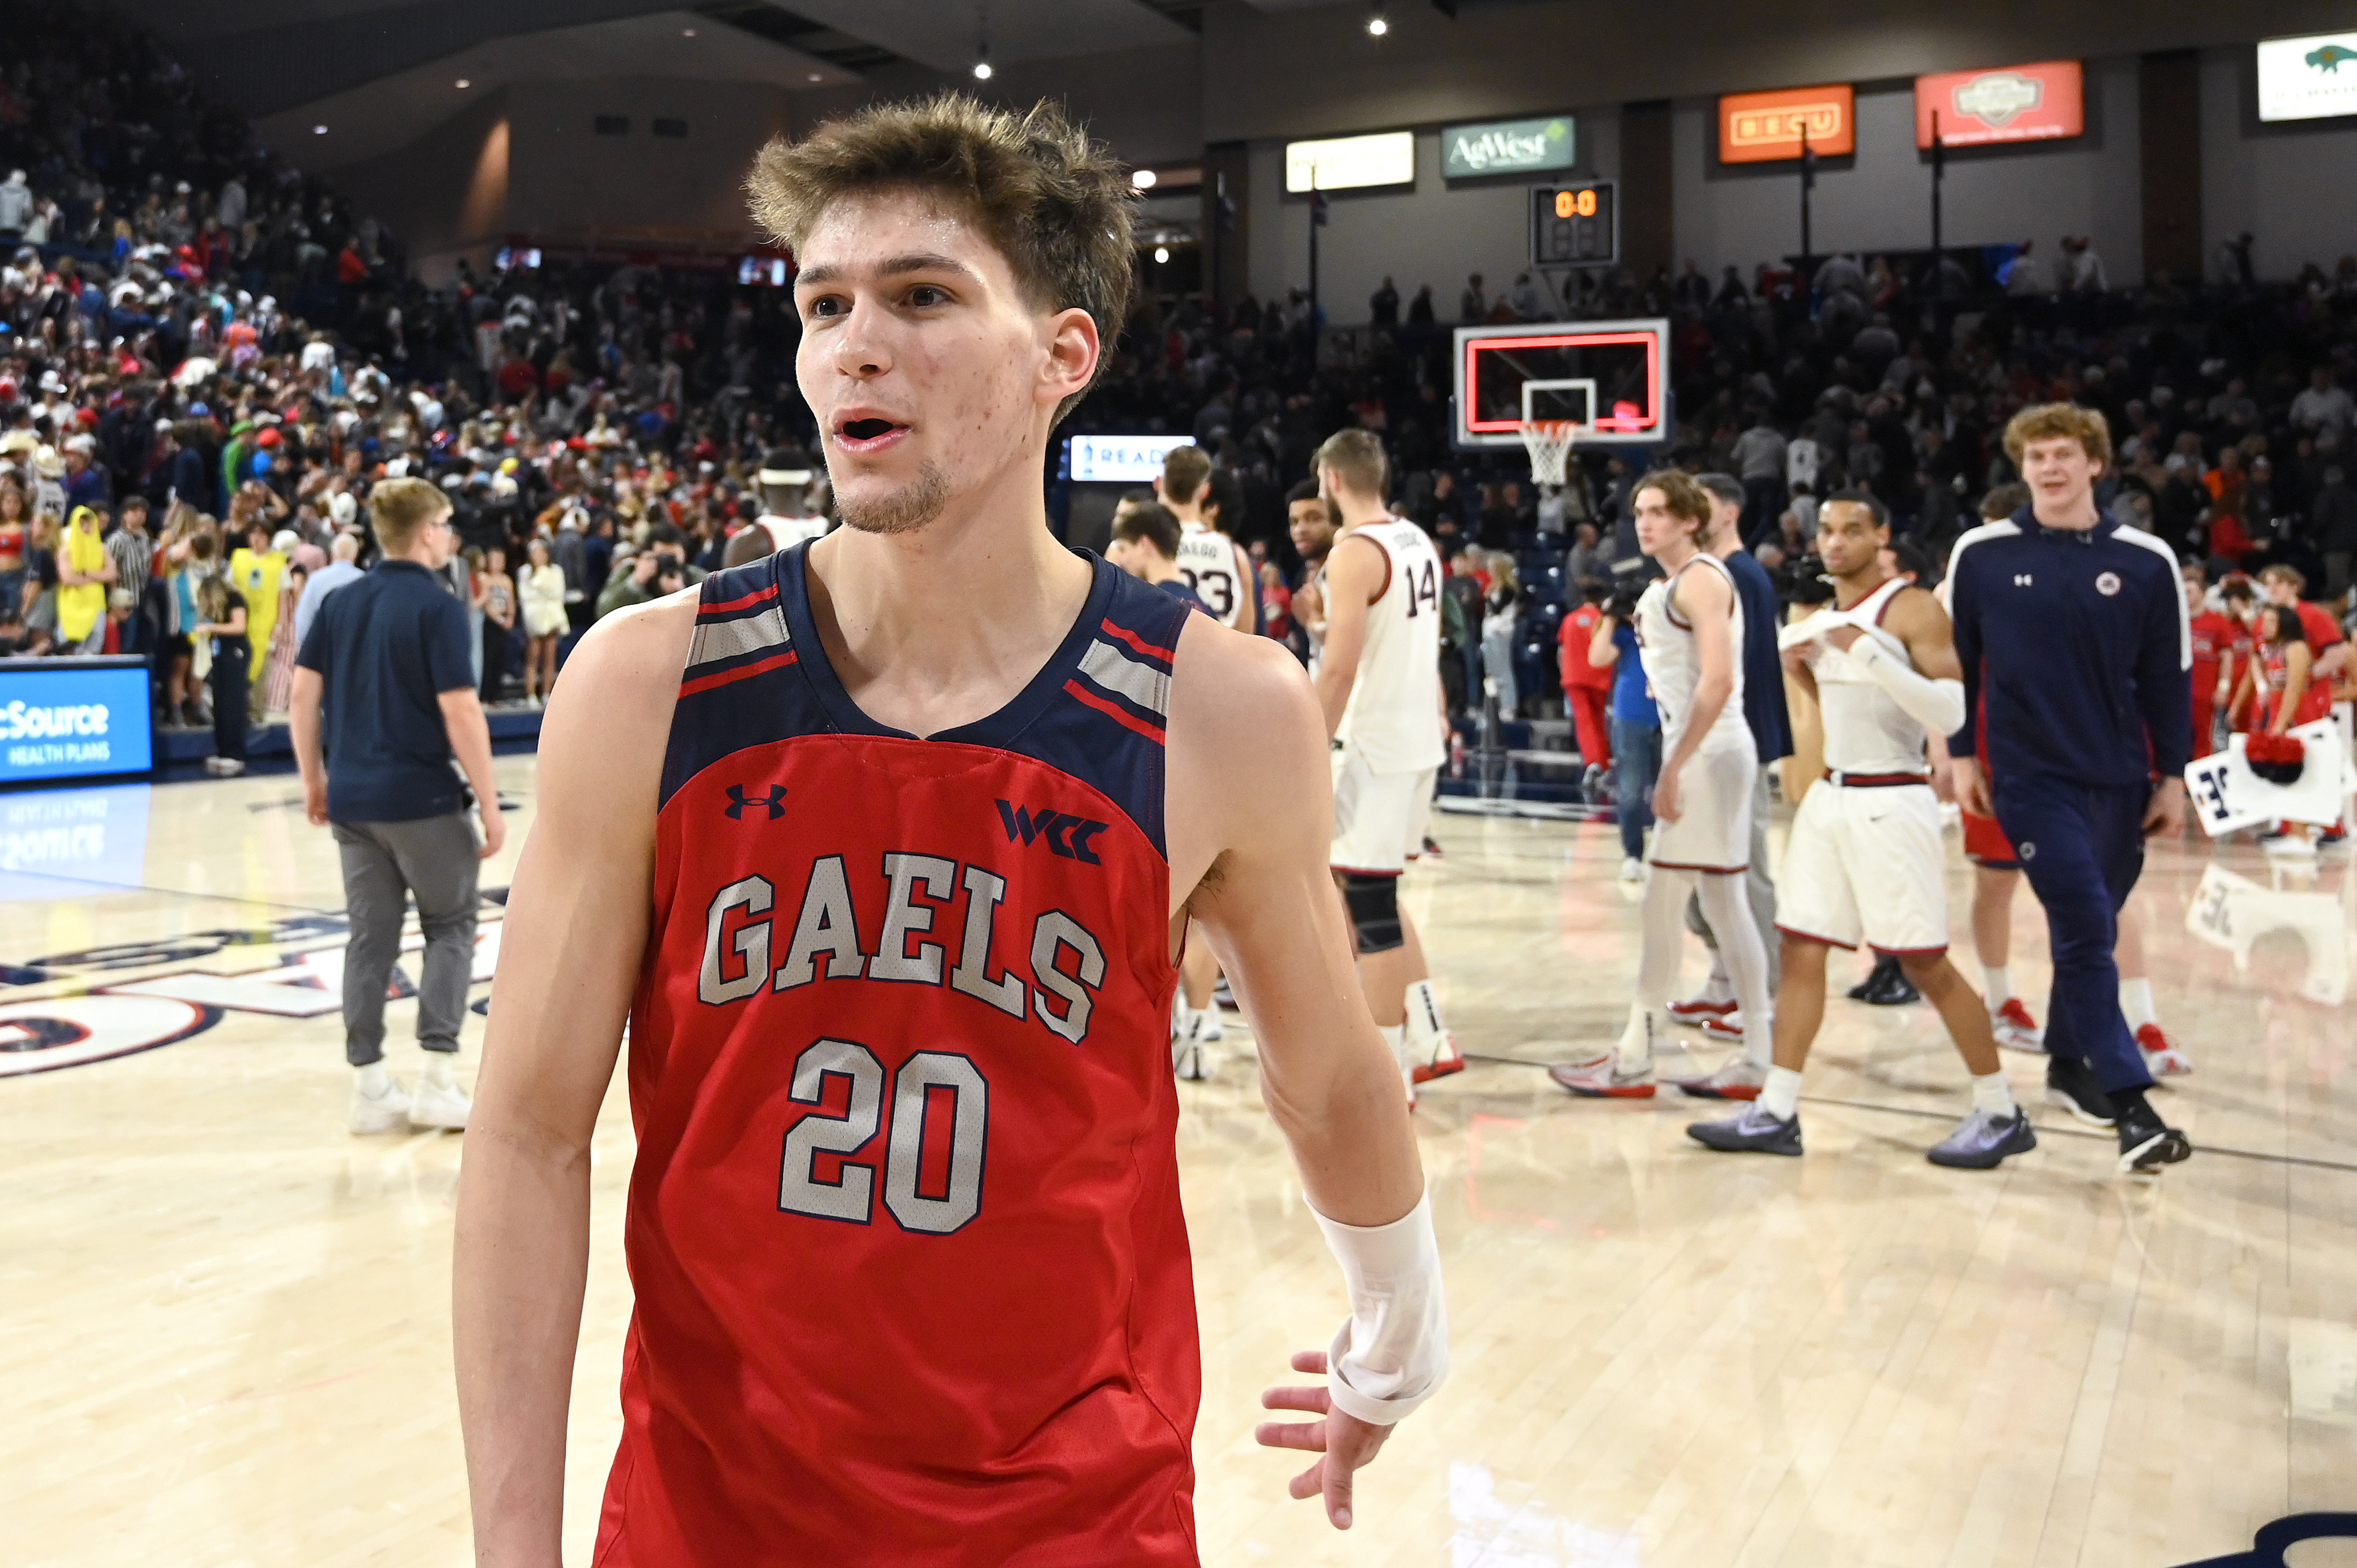 St. Mary’s Gaels guard Aidan Mahaney celebrates after a game against the Gonzaga Bulldogs in the second half at McCarthey Athletic Center. St. Mary’s Gaels won 64-62.